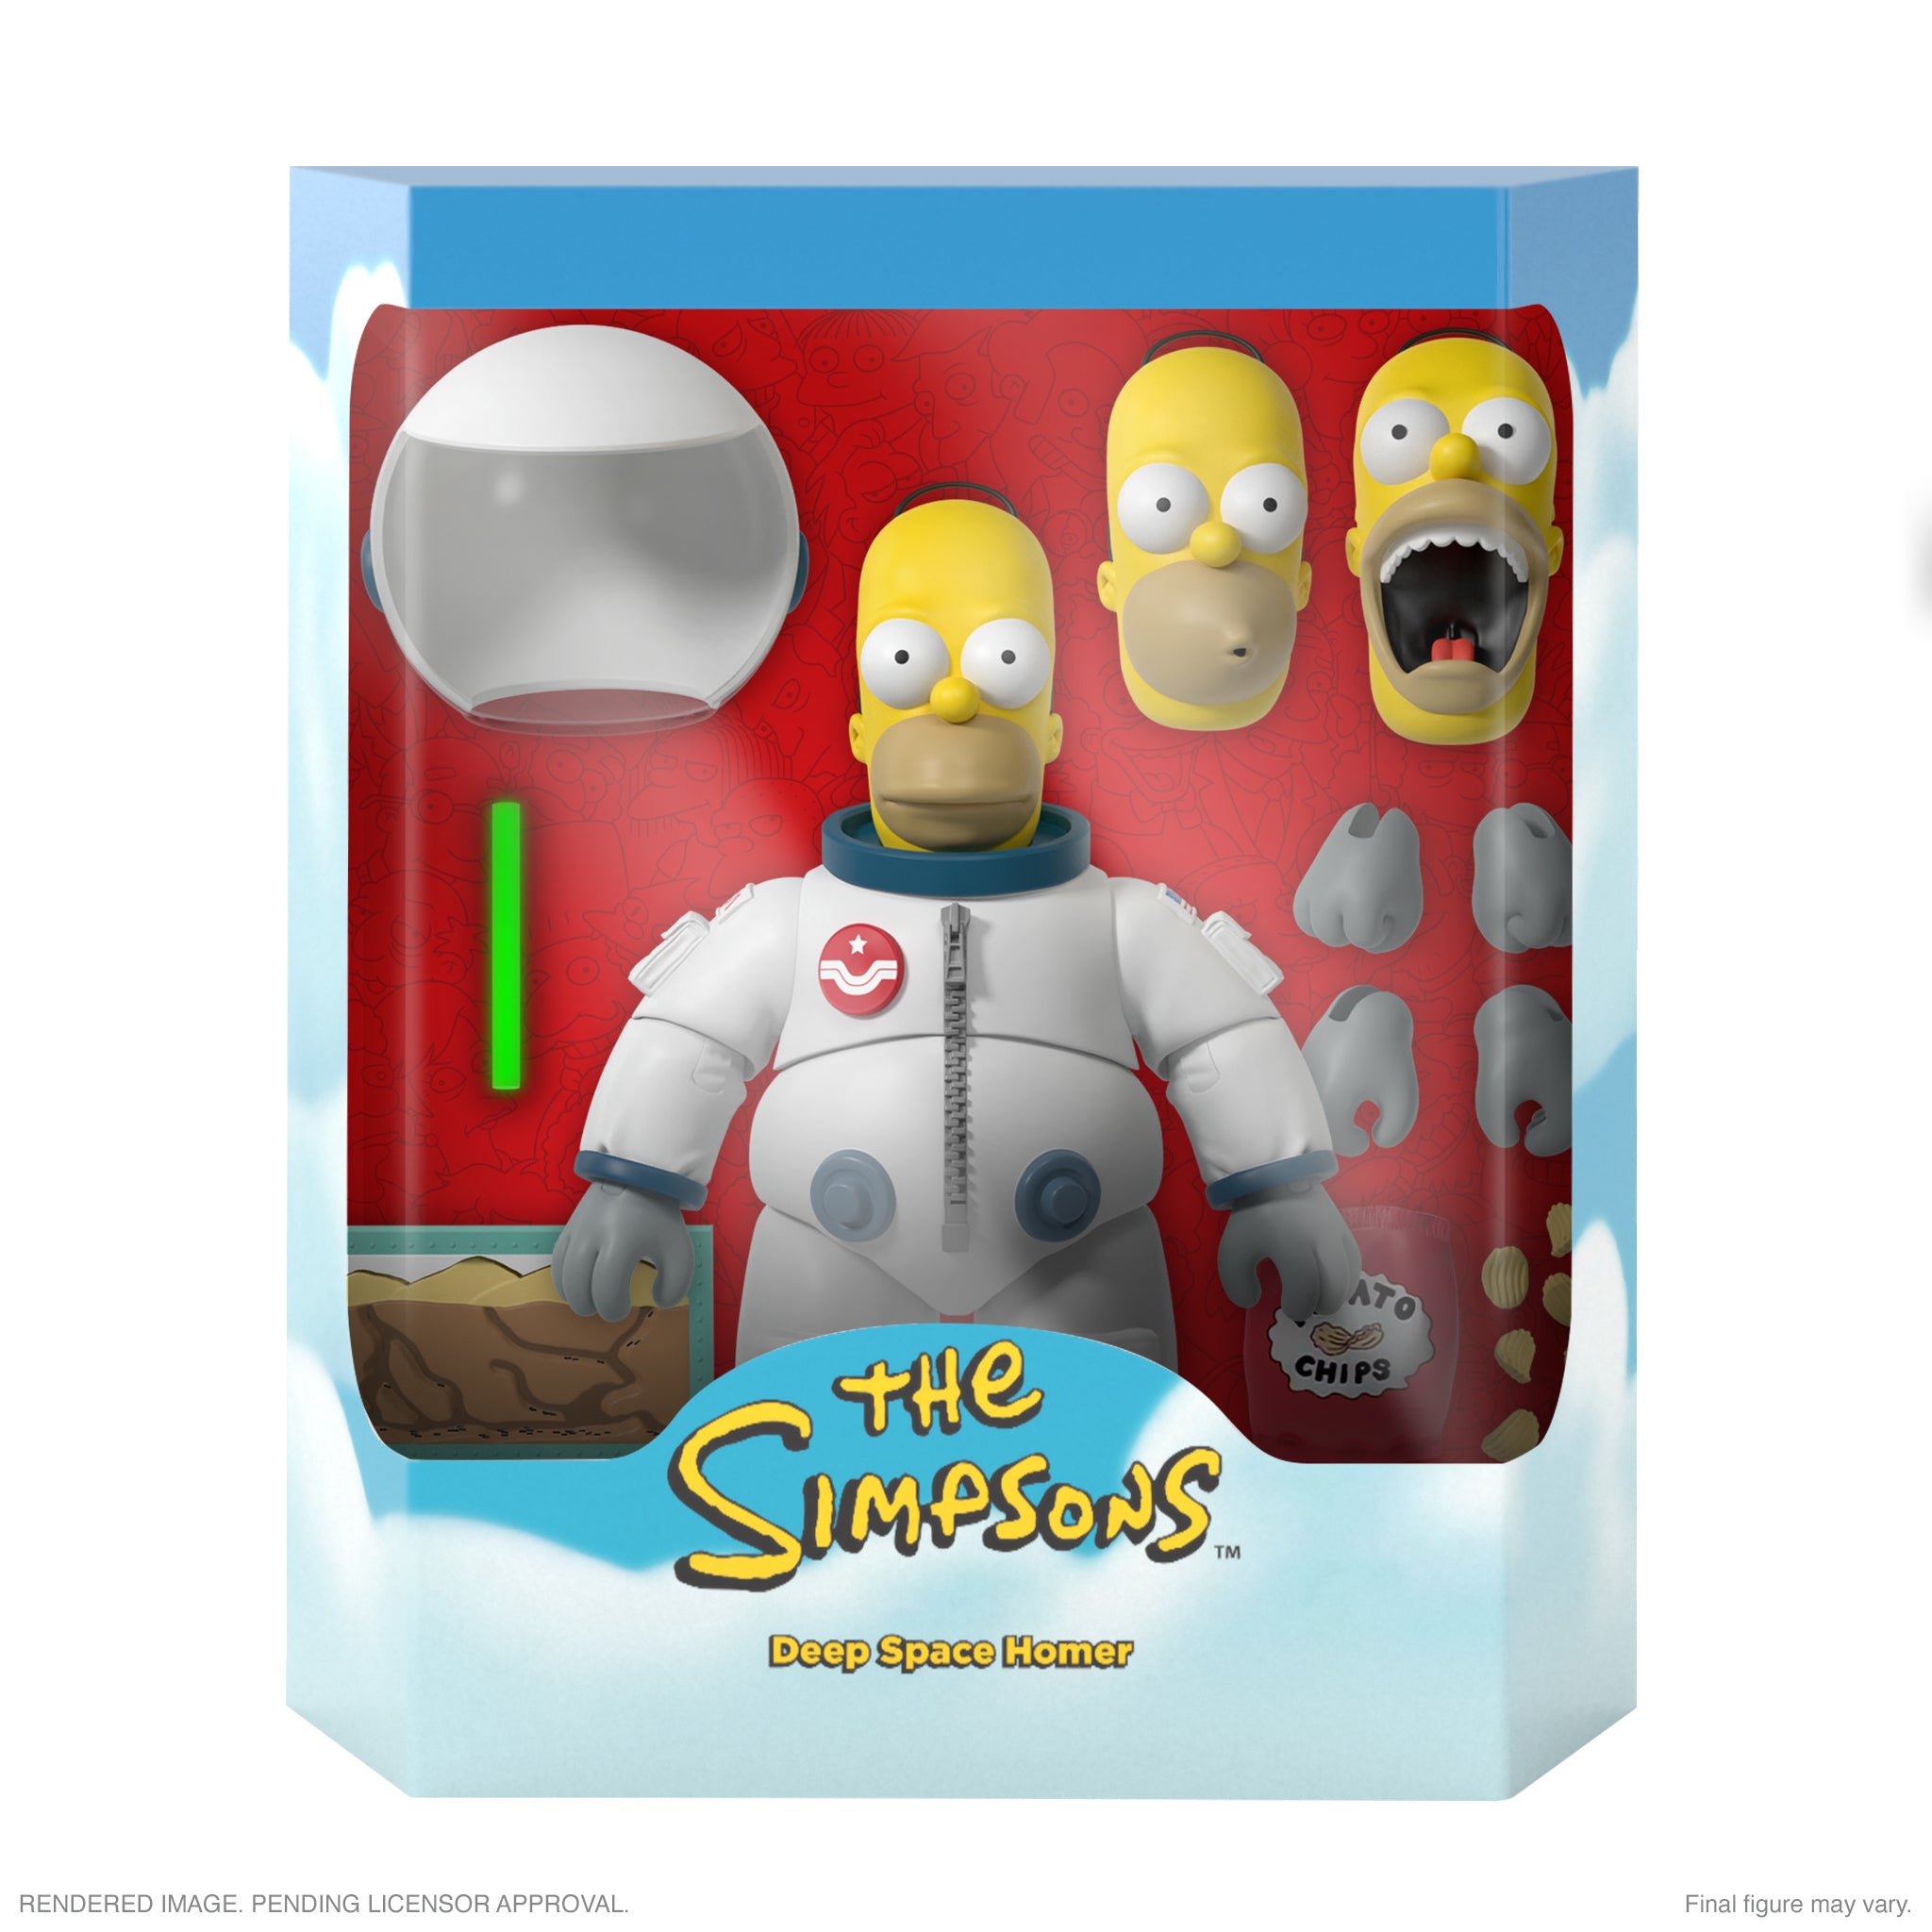 The Simpsons ULTIMATES! Wave 1 - Deep Space Homer